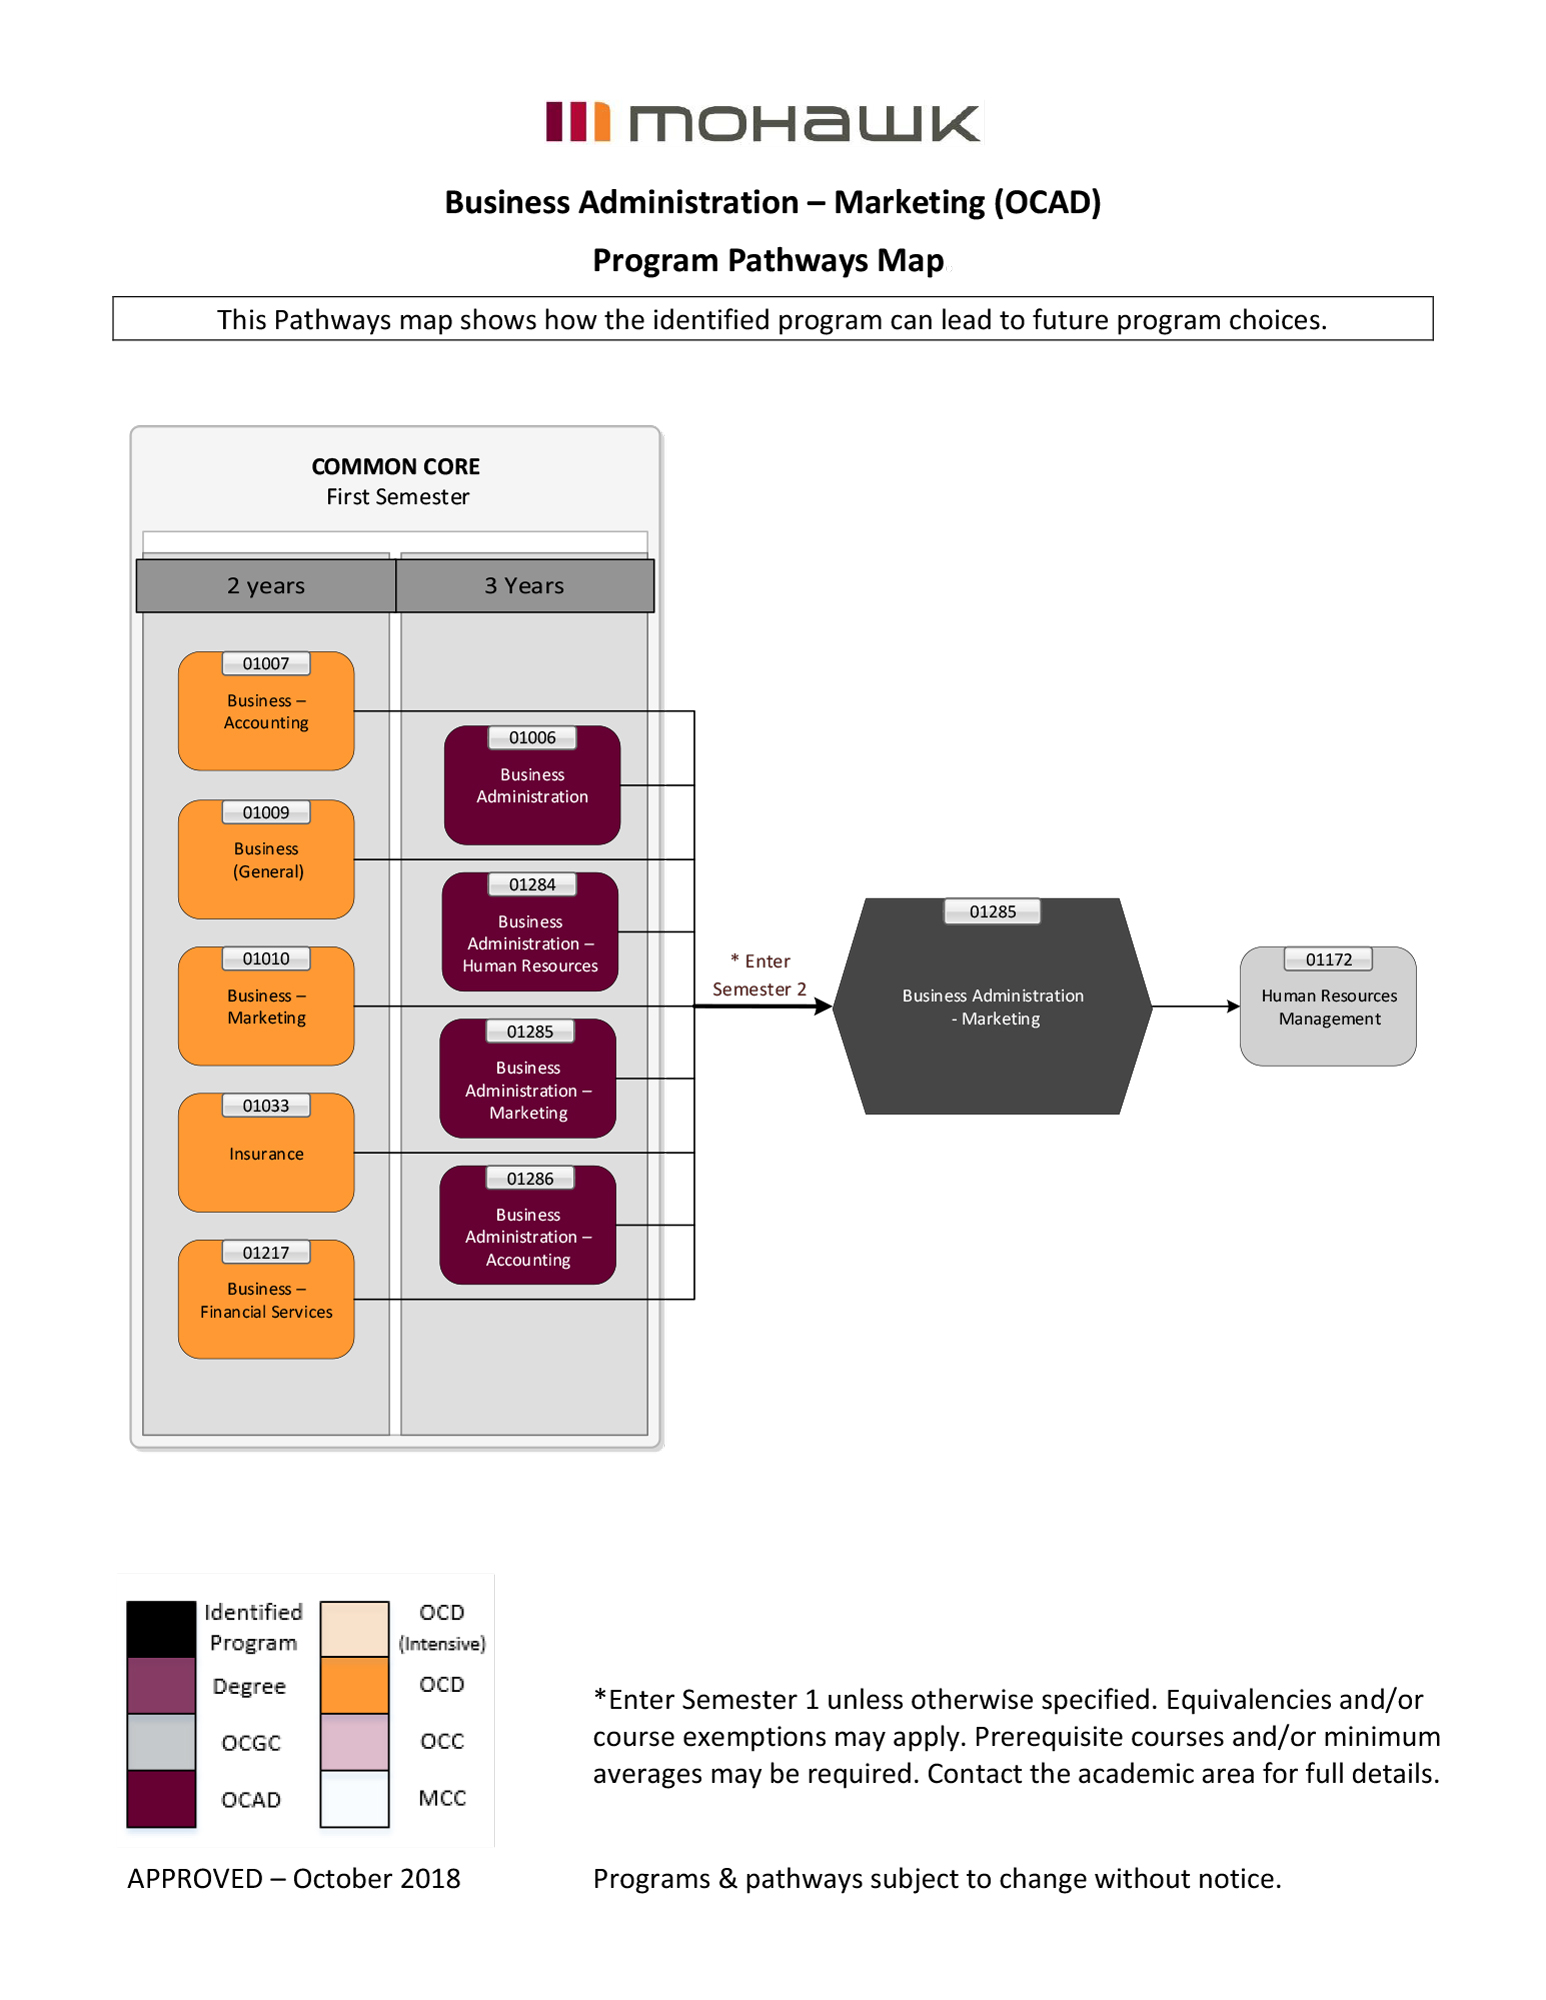 Business Administration Marketing pathways map